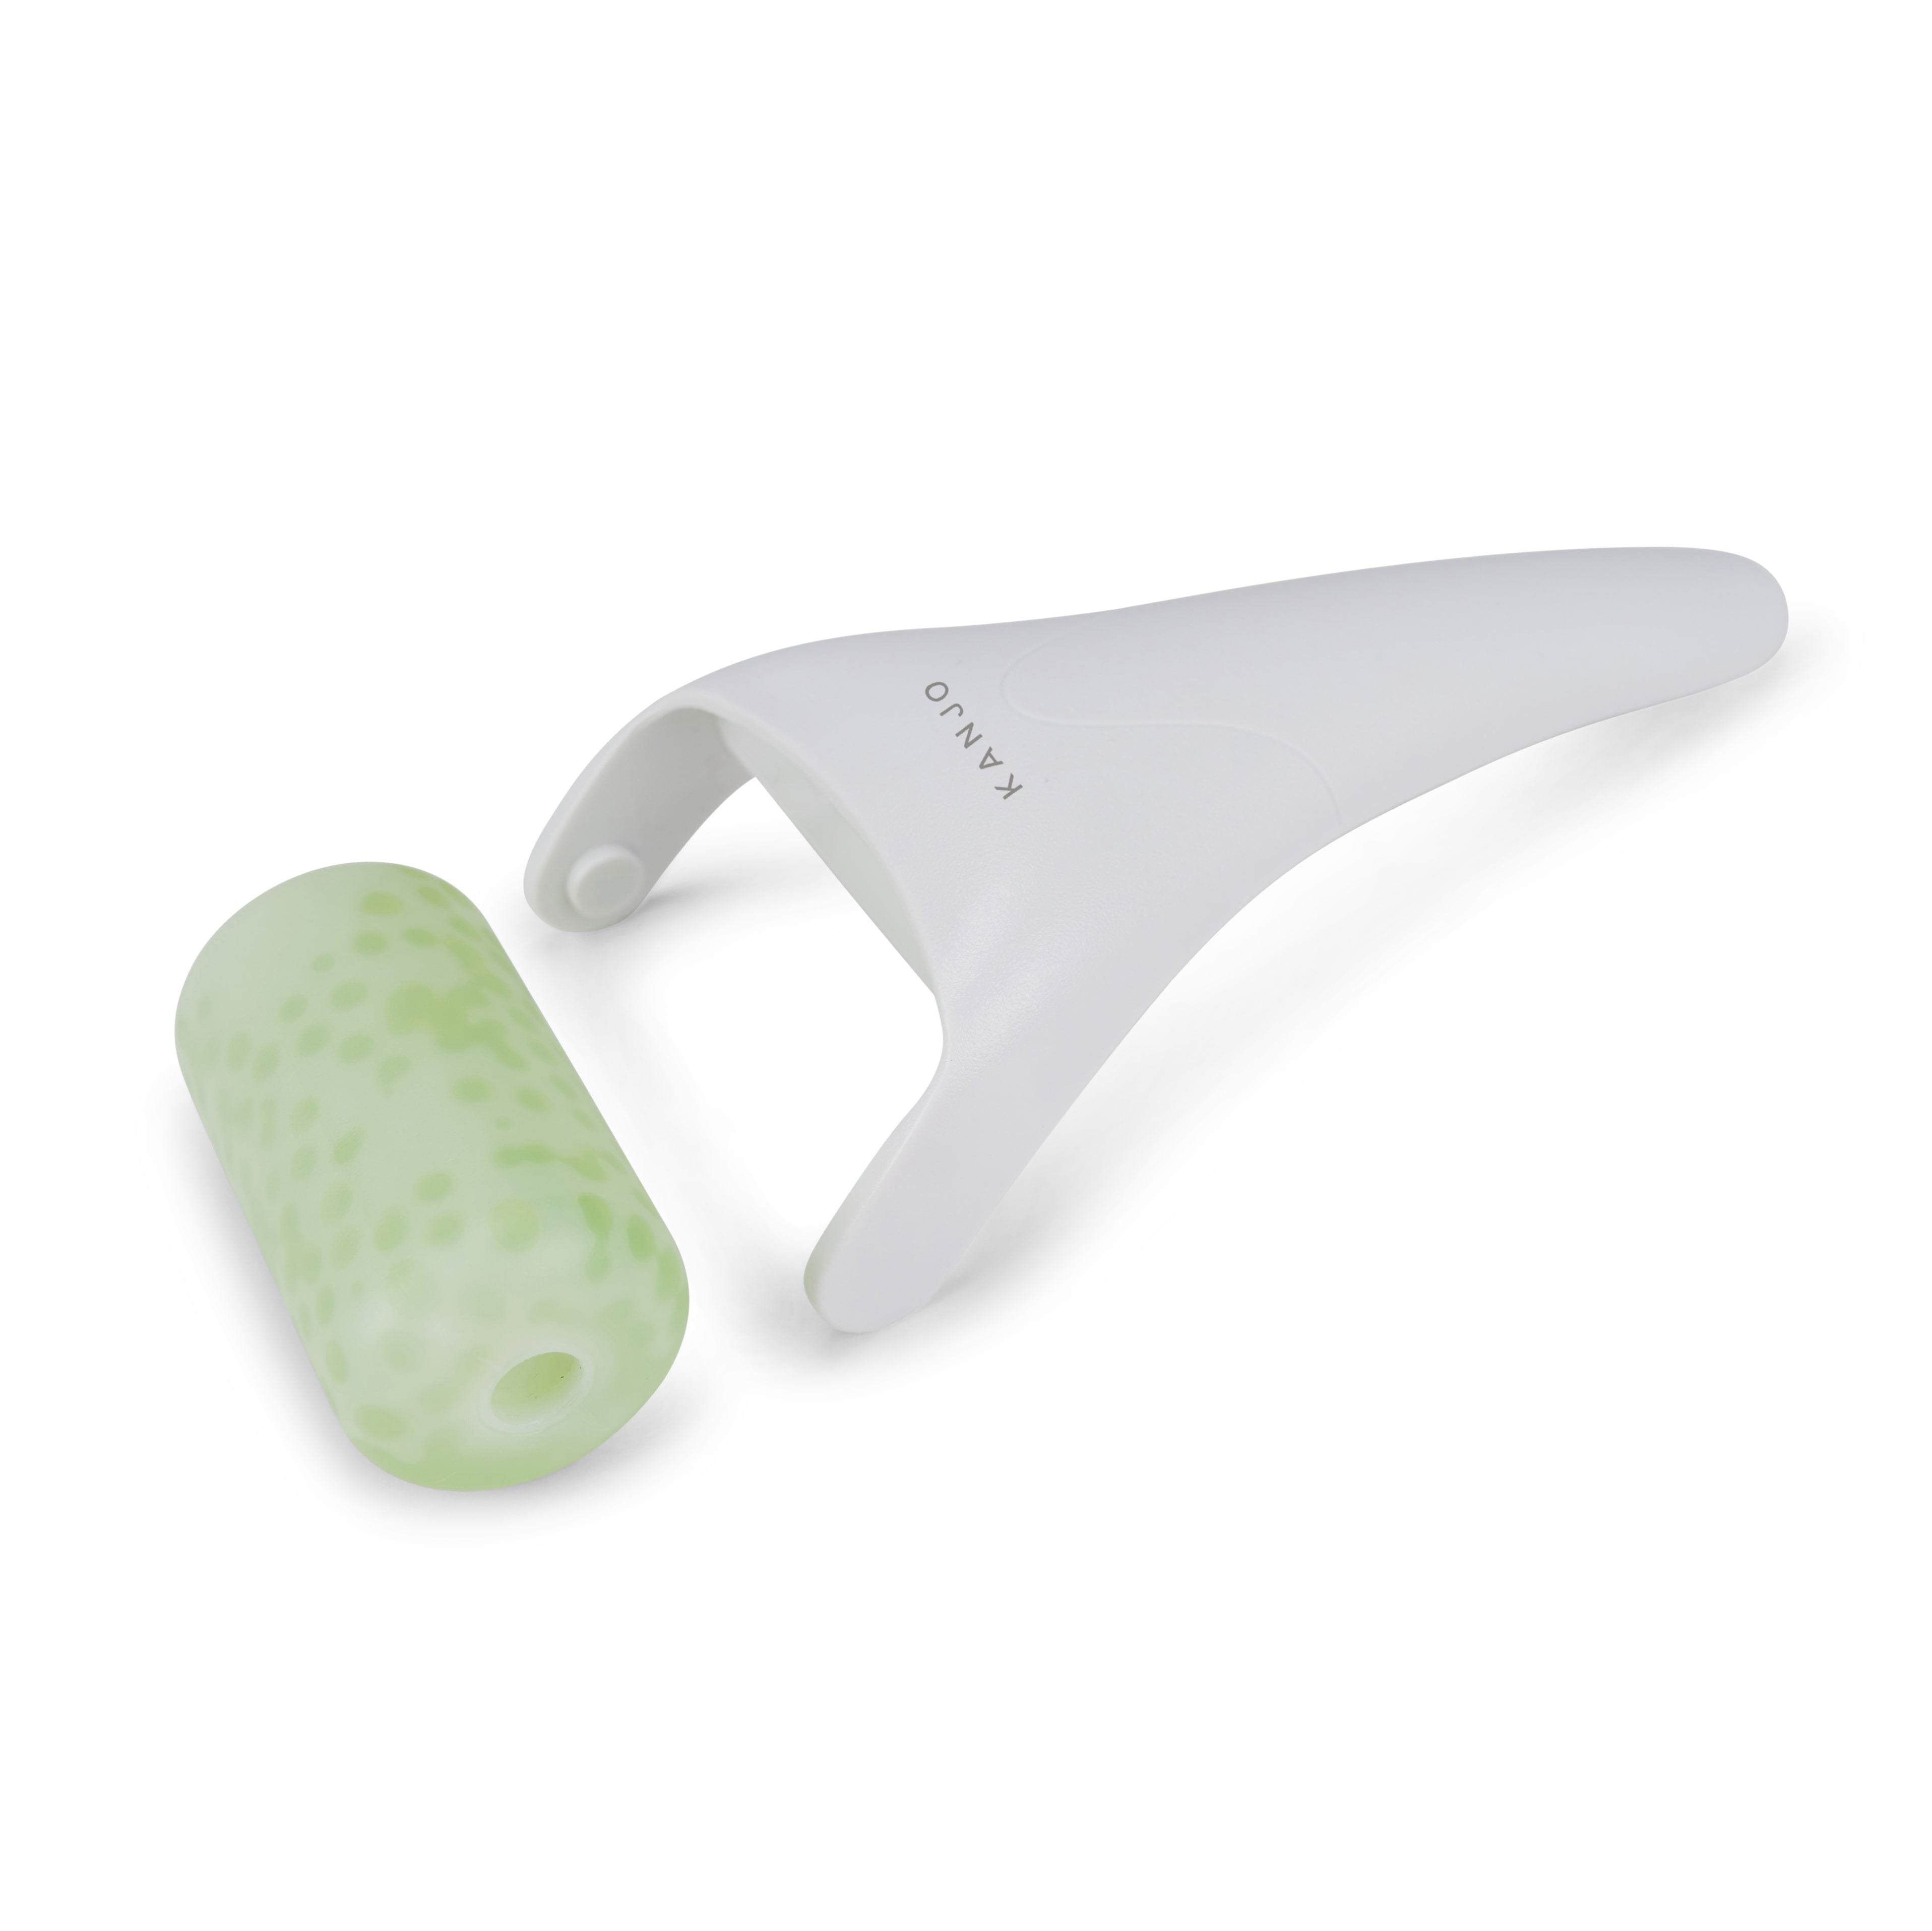 Face Roller Review - This Ice Roller For Your Face Eases Jaw Pain